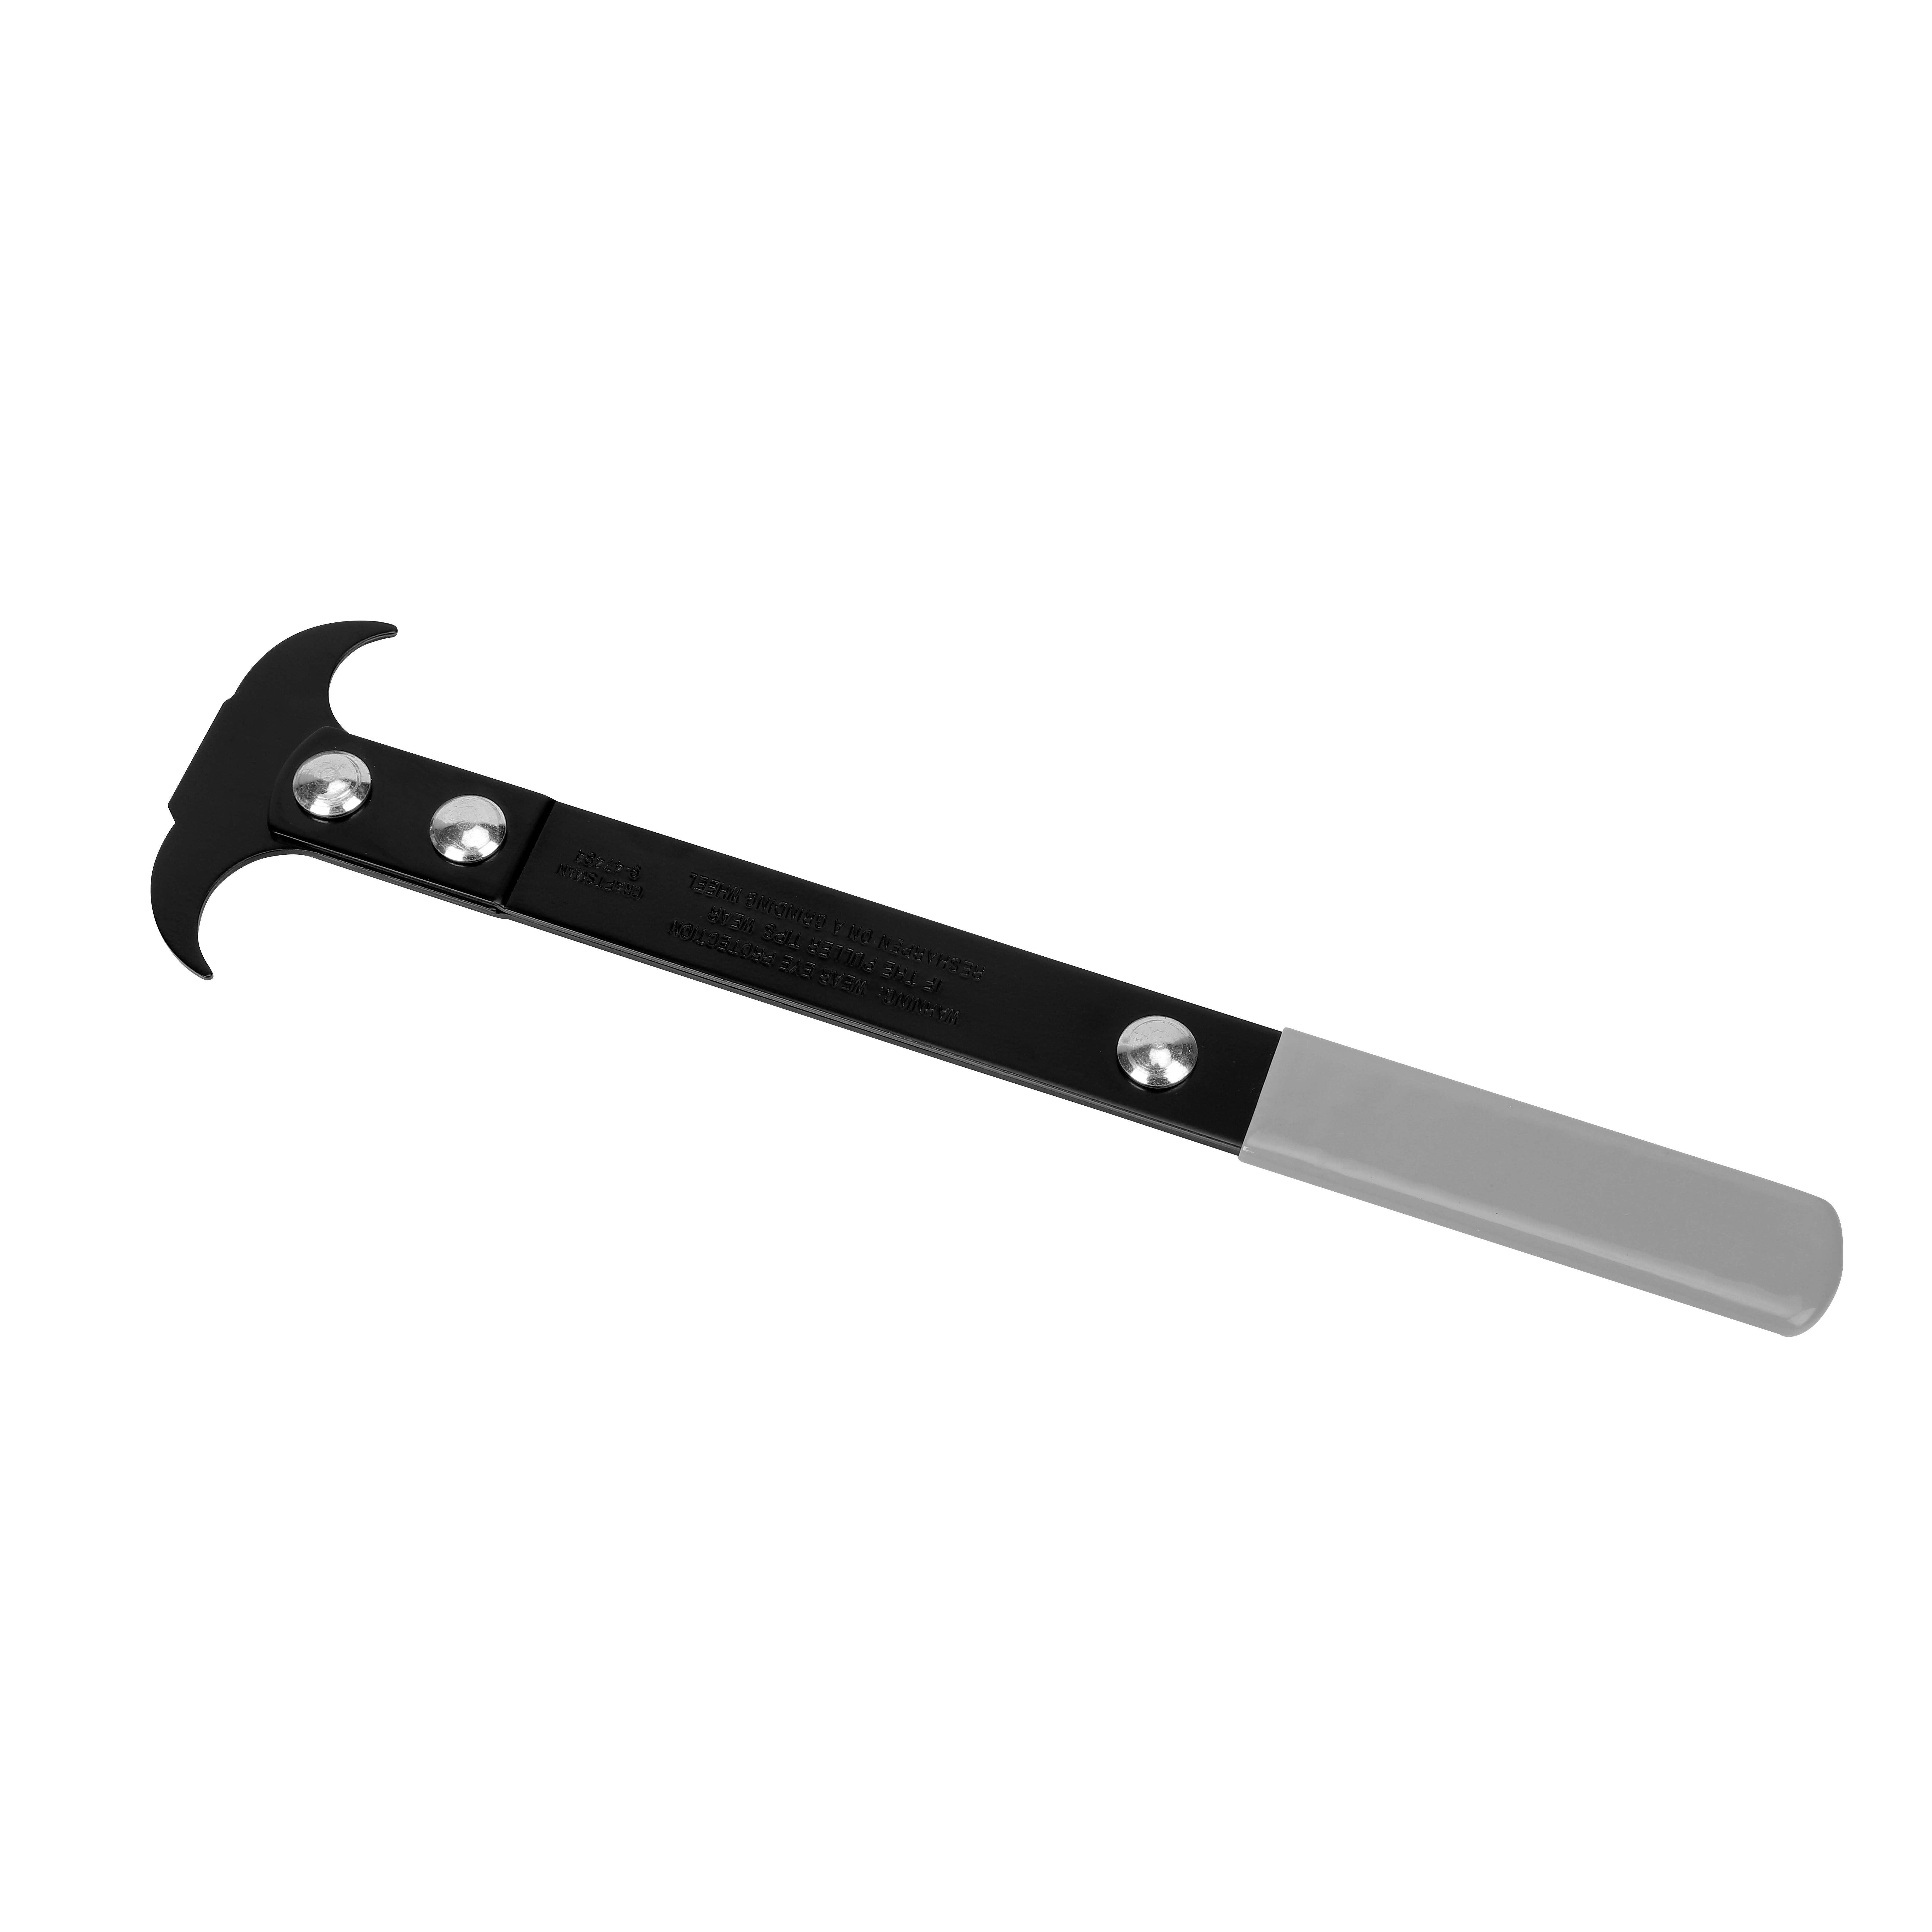 Craftsman Seal Puller | Shop Your Way: Online Shopping & Earn Points on